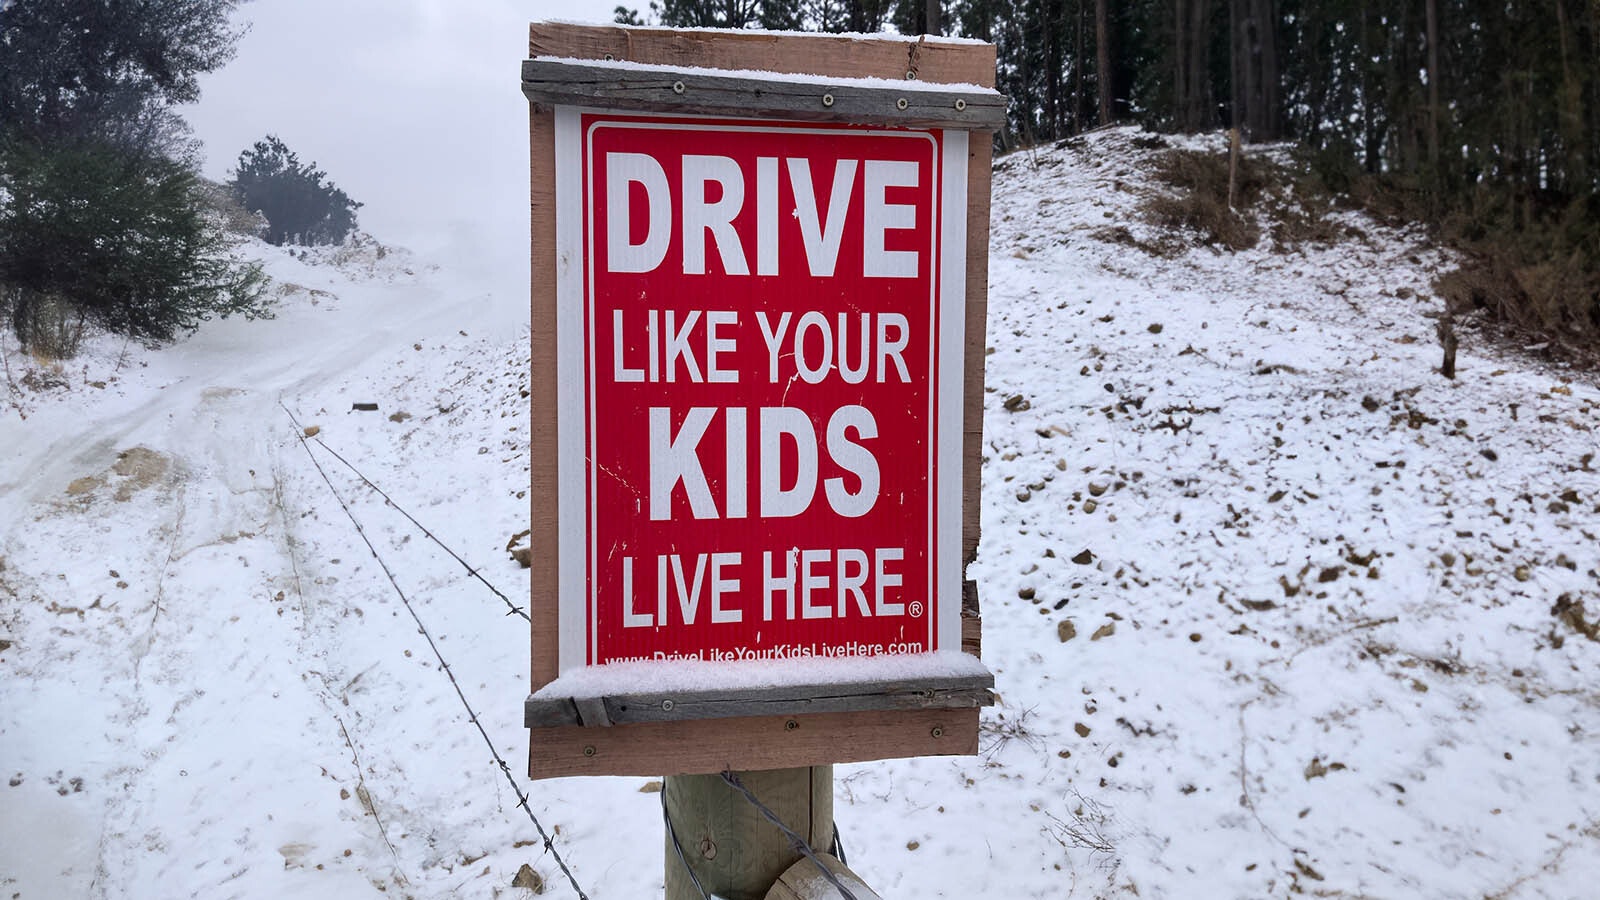 The sign erected by the Wolfskills to protect their grandchildren does nothing to dissuade speeding traffic through his property.